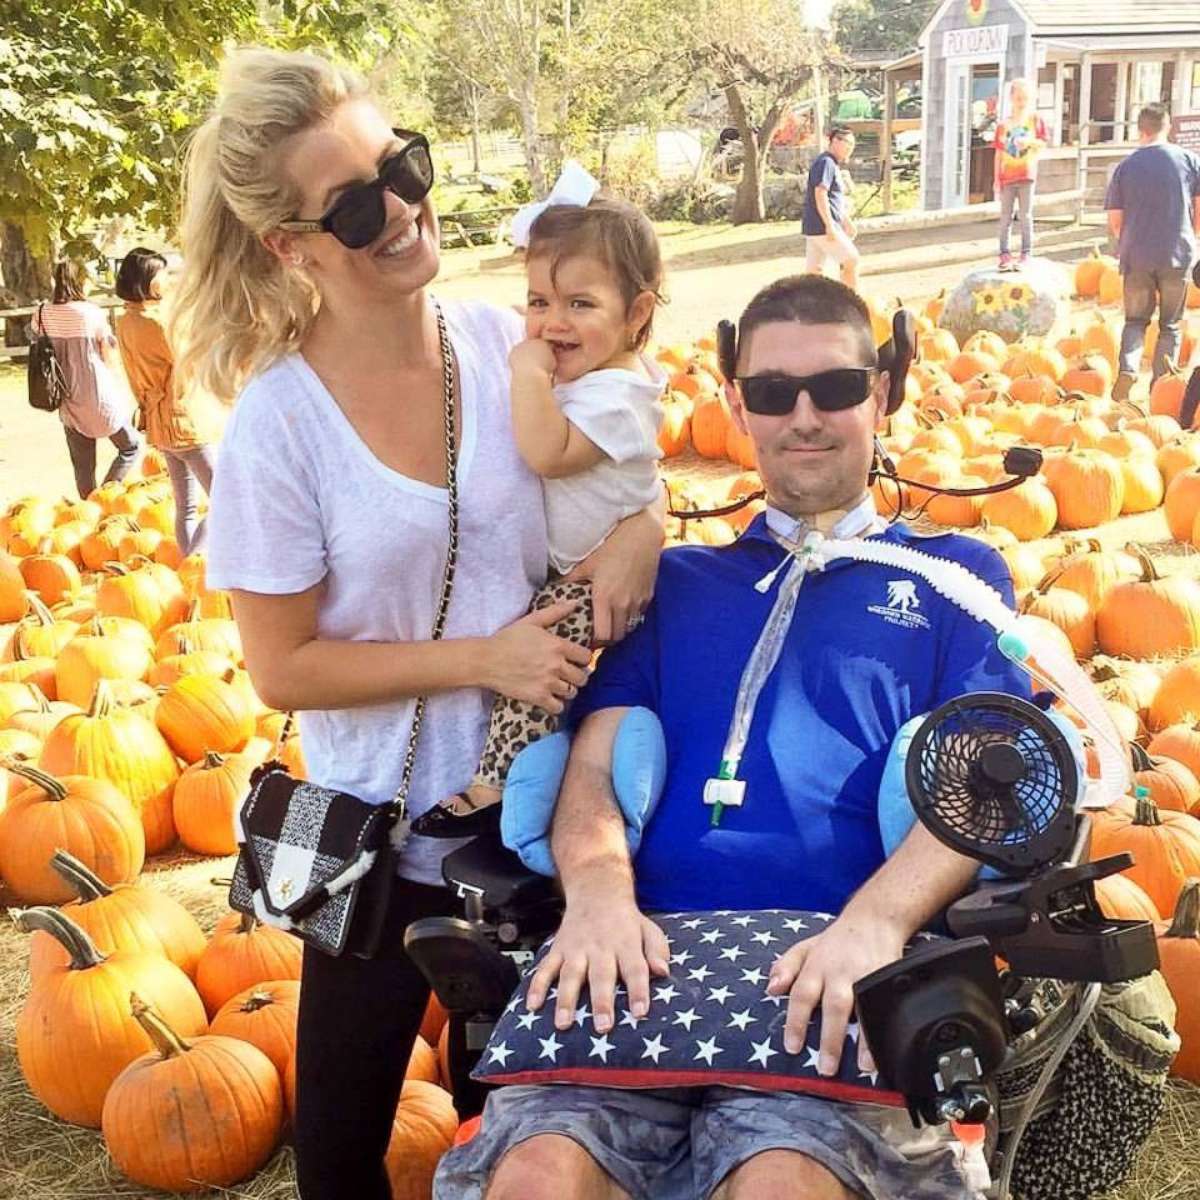 Pete and Julie Frates are seen here with their daughter Lucy in this family photo.